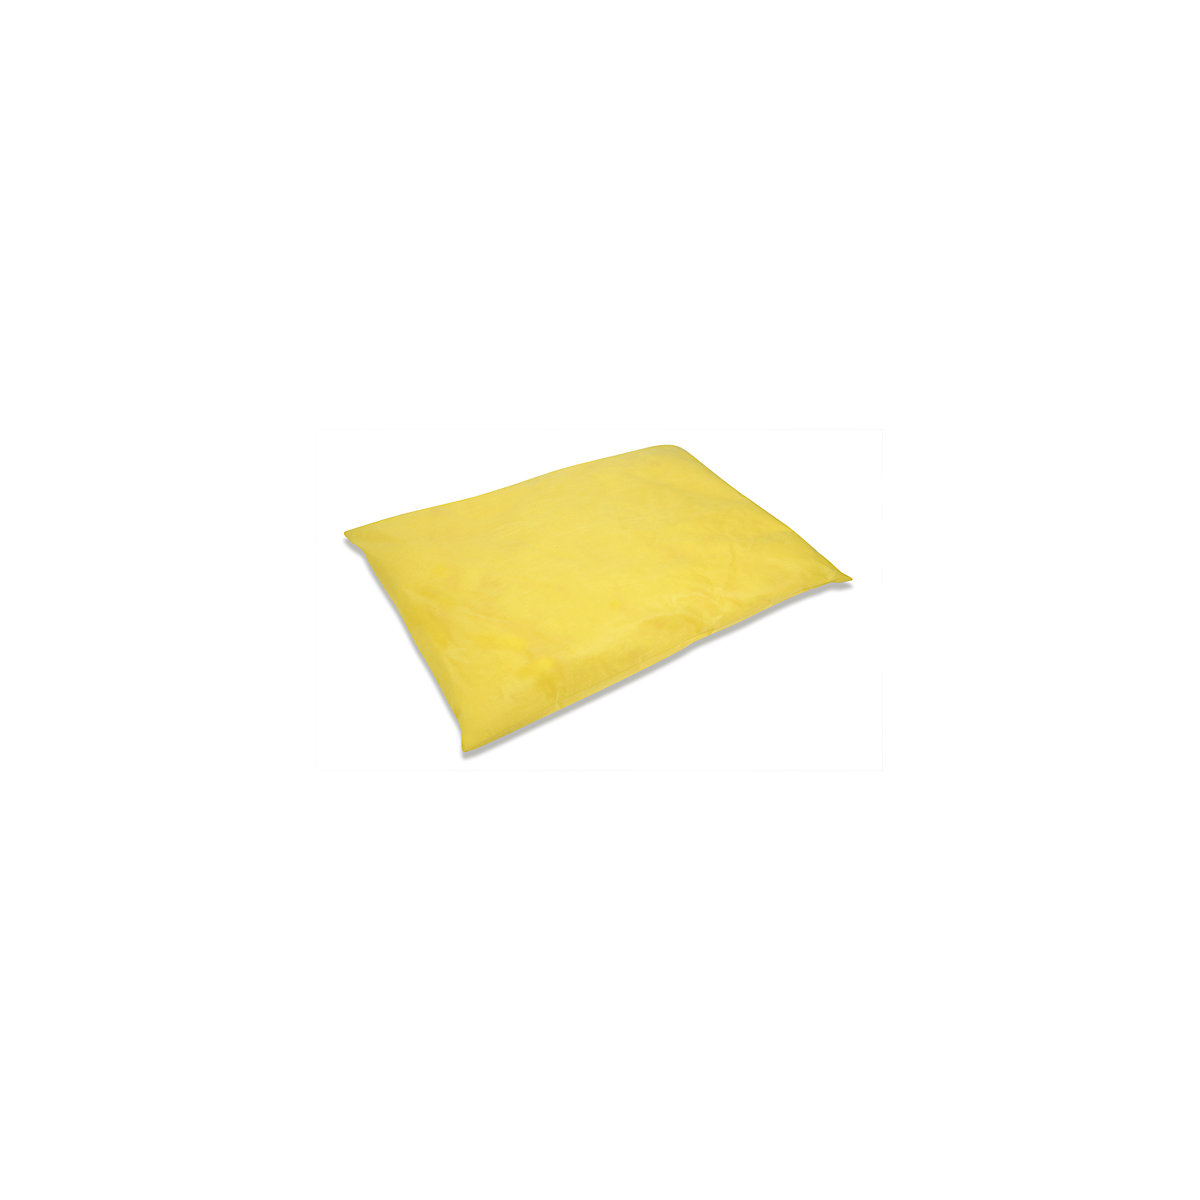 Absorbent fleece cushion, chemical version, 600 x 800 mm, pack of 4-5